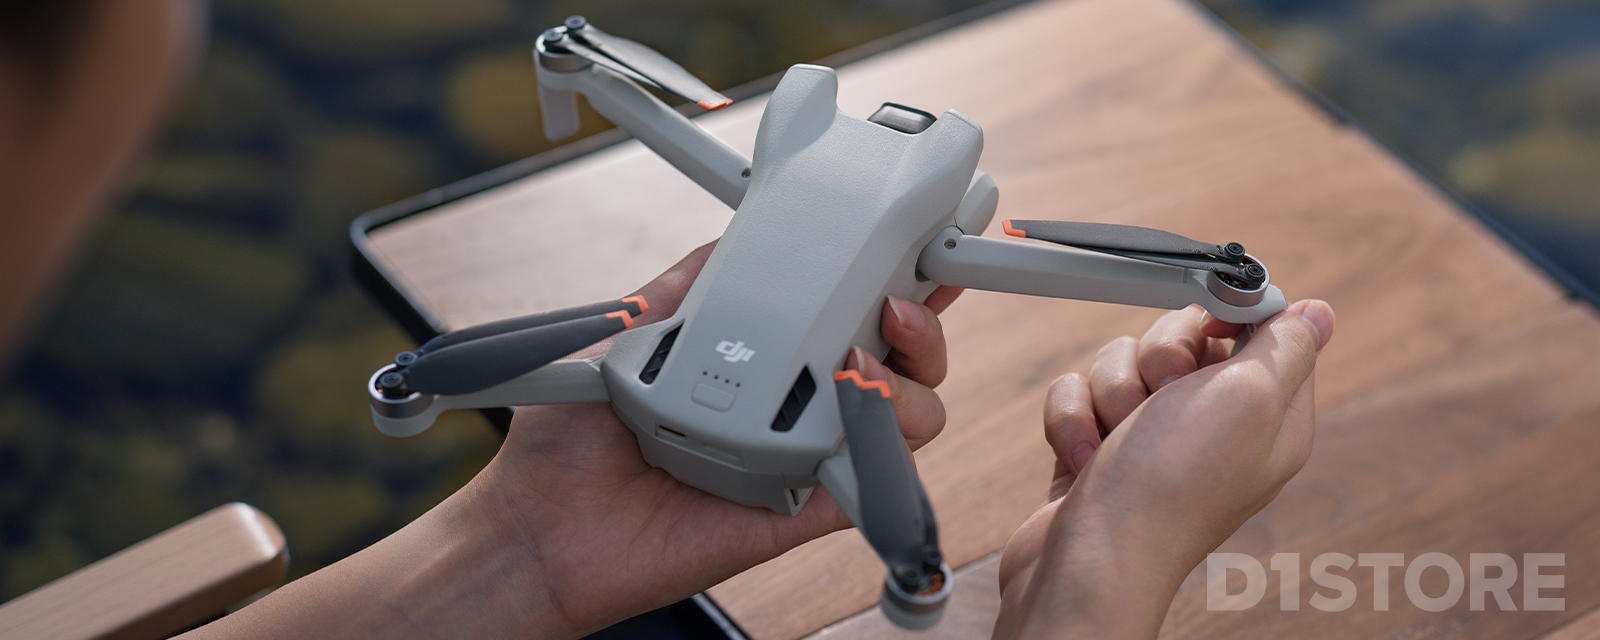 DJI Mini 3 Fly More Combo Plus - Ready for Takeoff | Best Price Guarantee at D1 Store